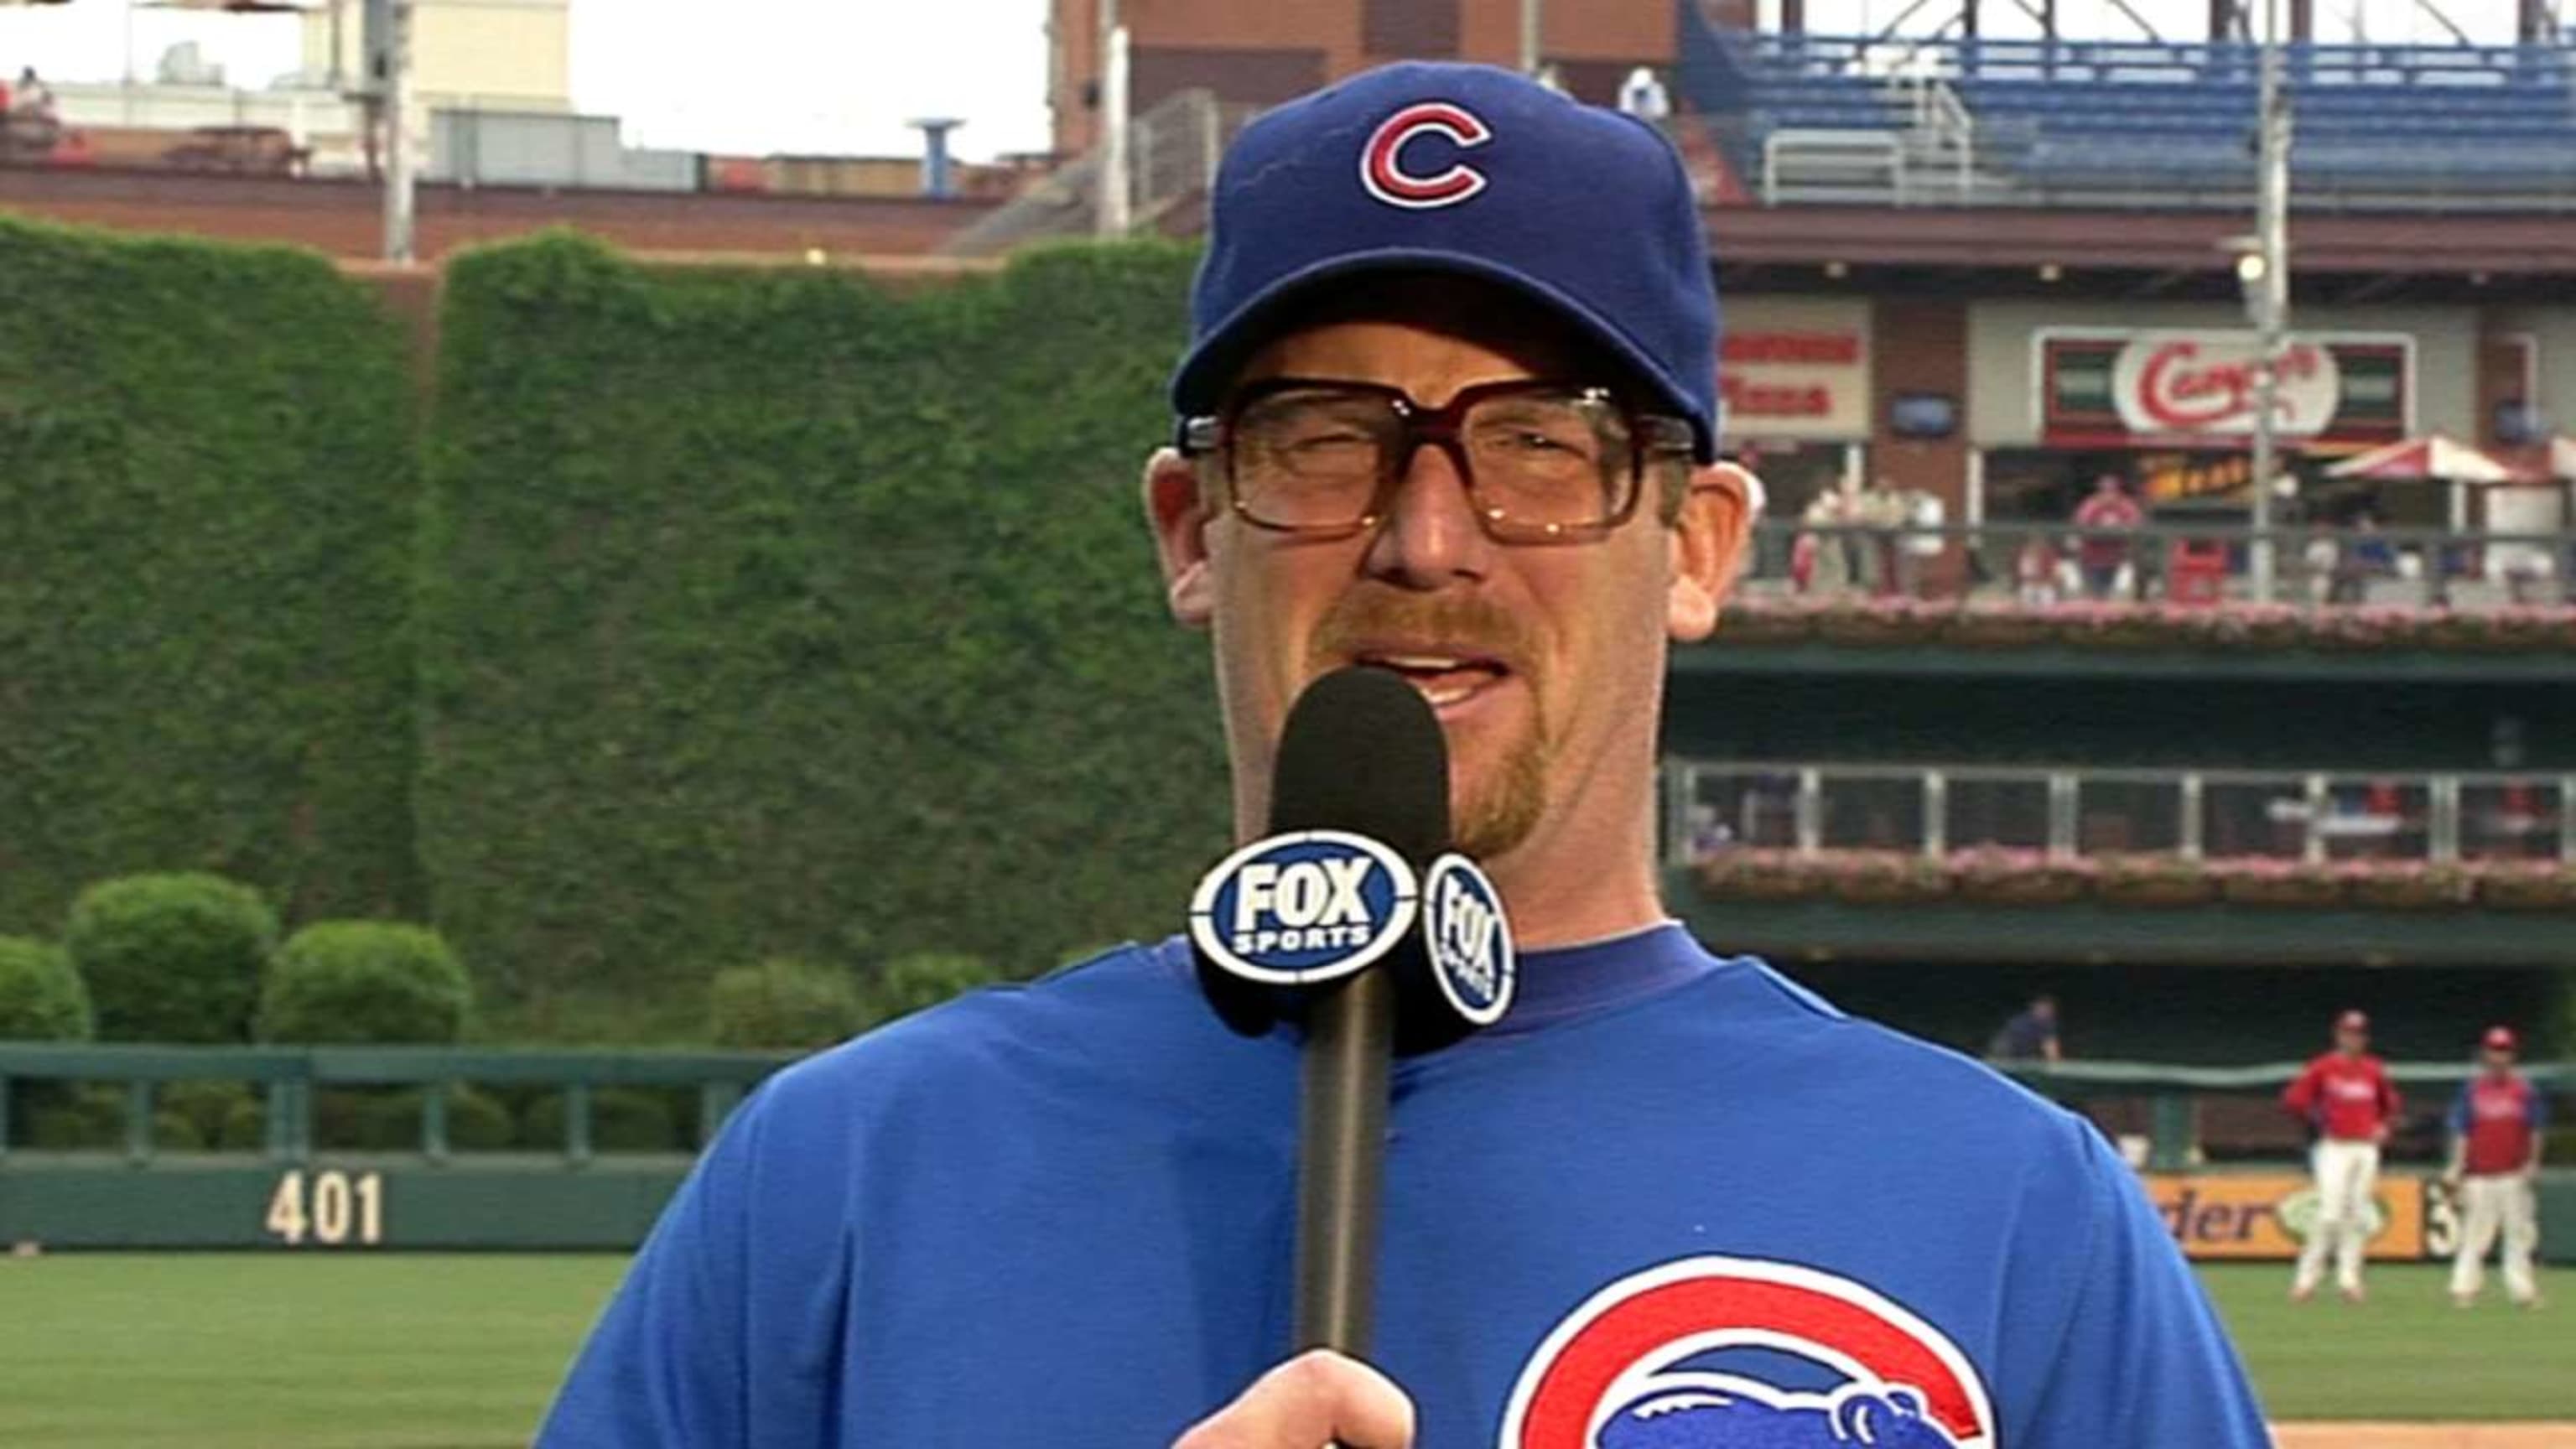 Chicago Cubs loyal fan of Harry Caray - Gold Medal Impressions